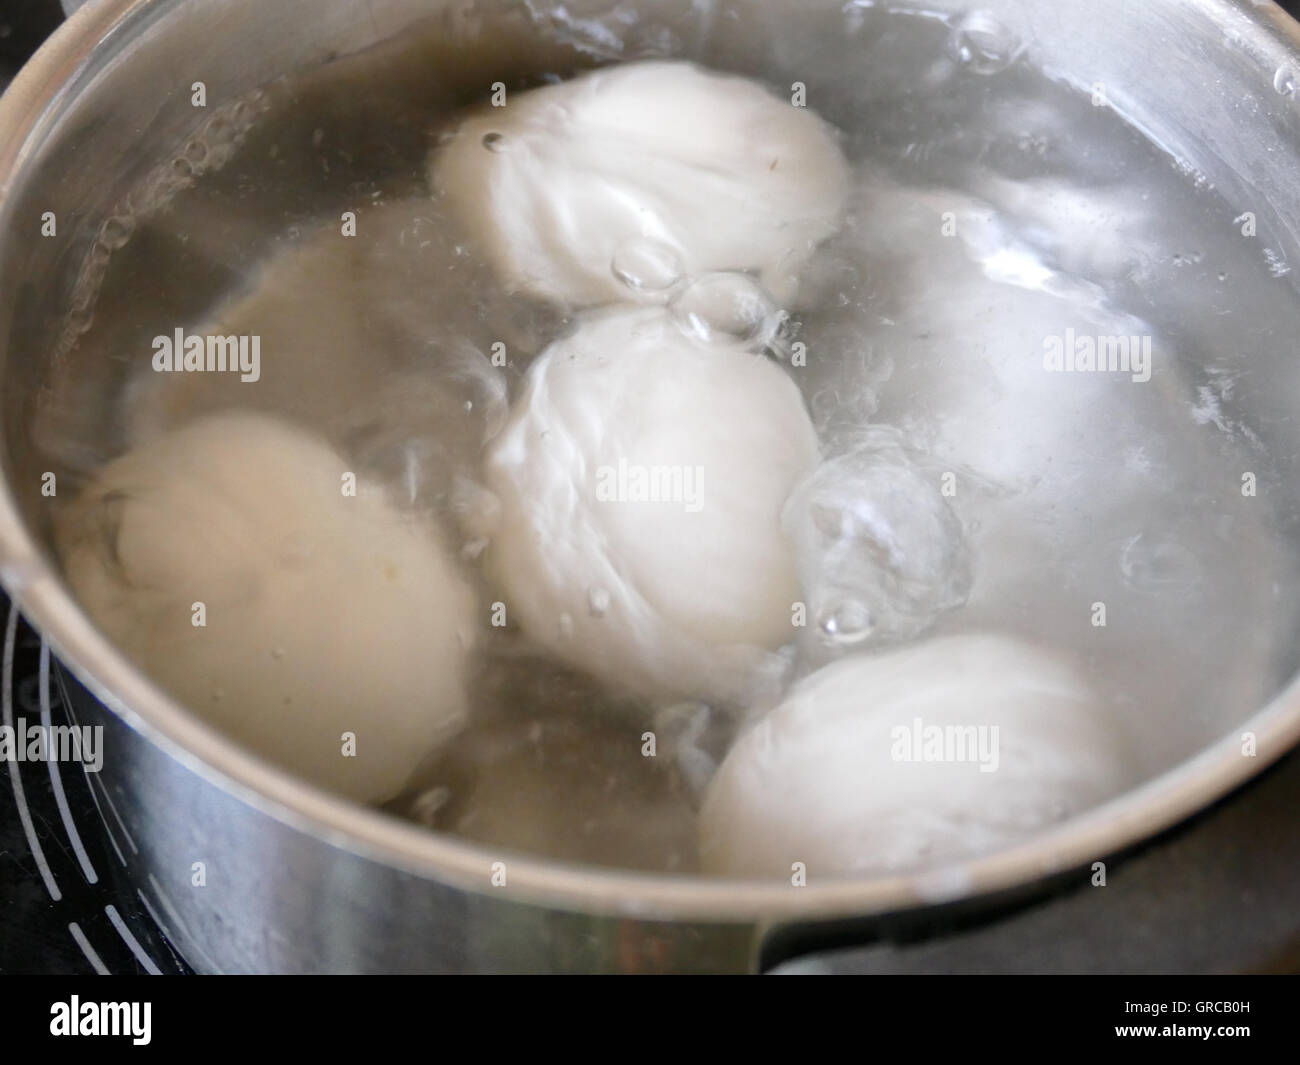 White Eggs Being Boiled In A Pot Stock Photo